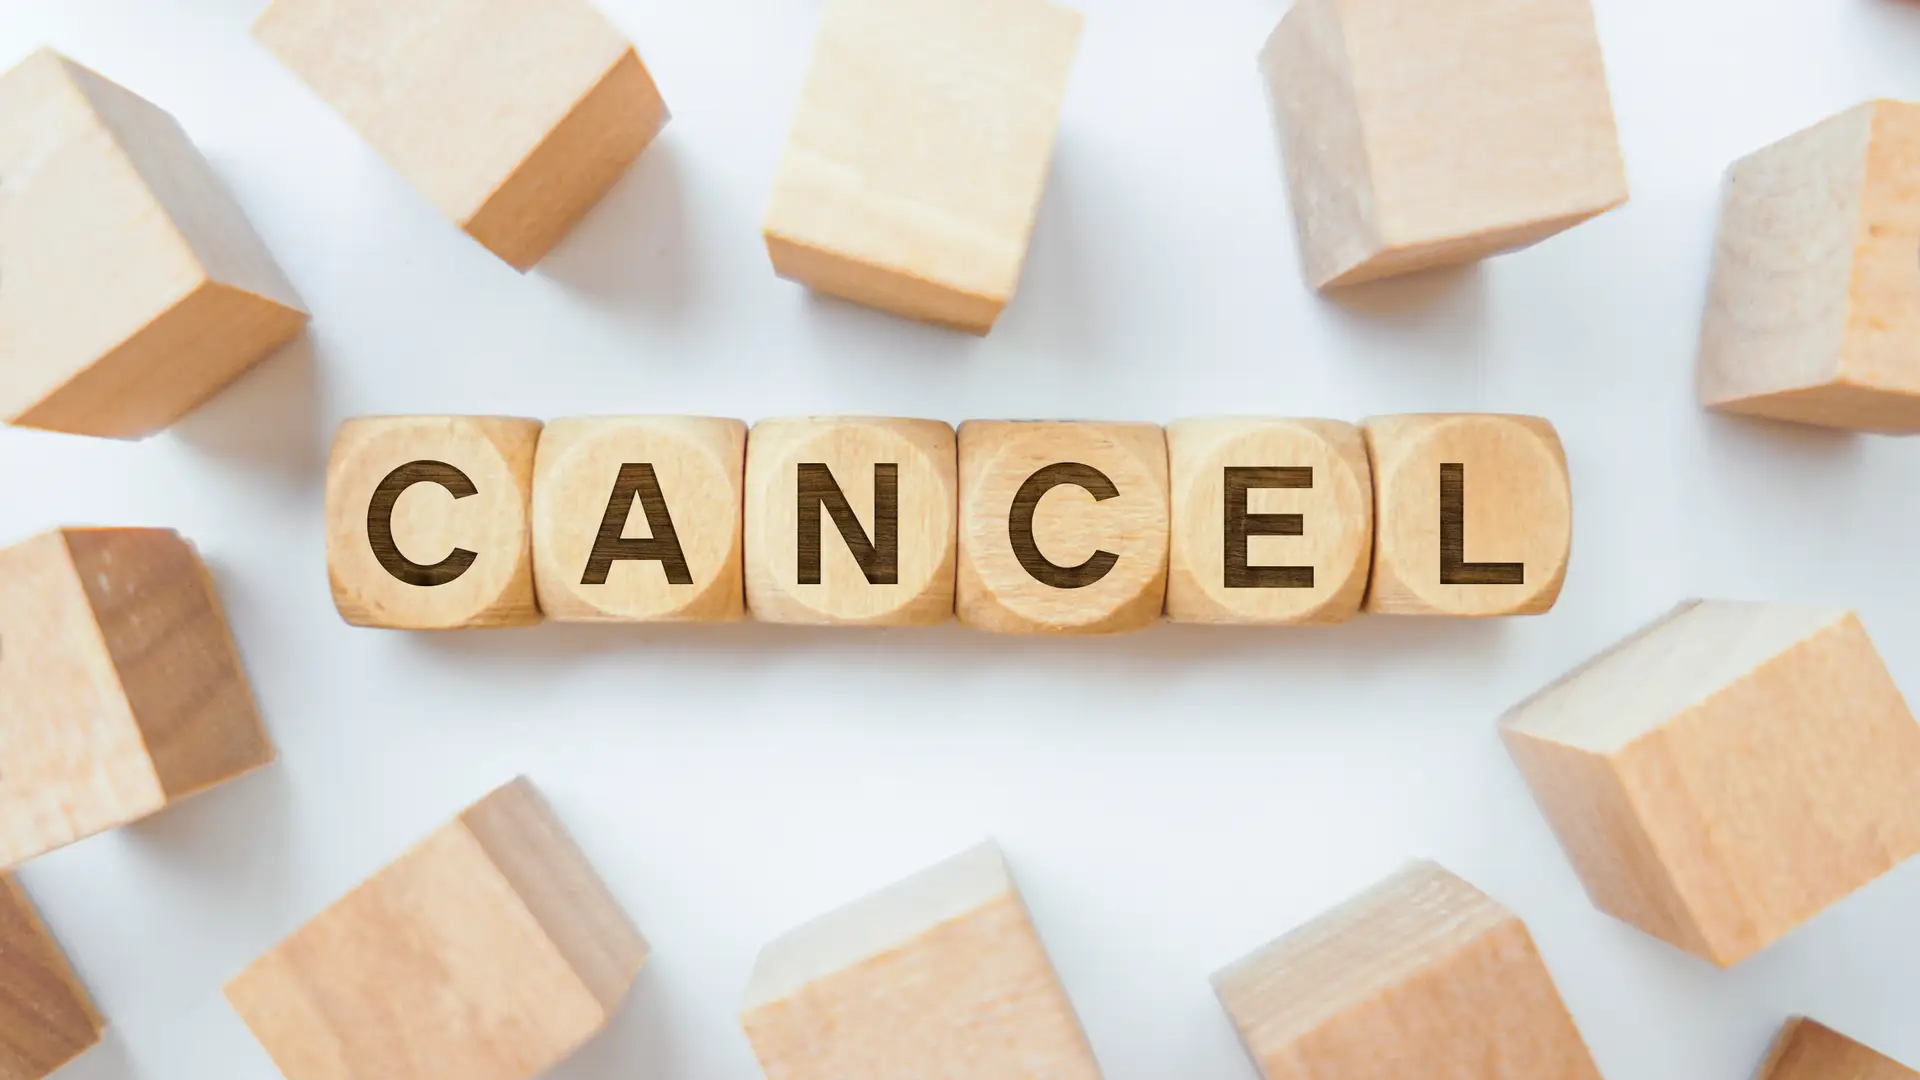 Word cancel on wooden cubes representing the cancellation of plusnet plans